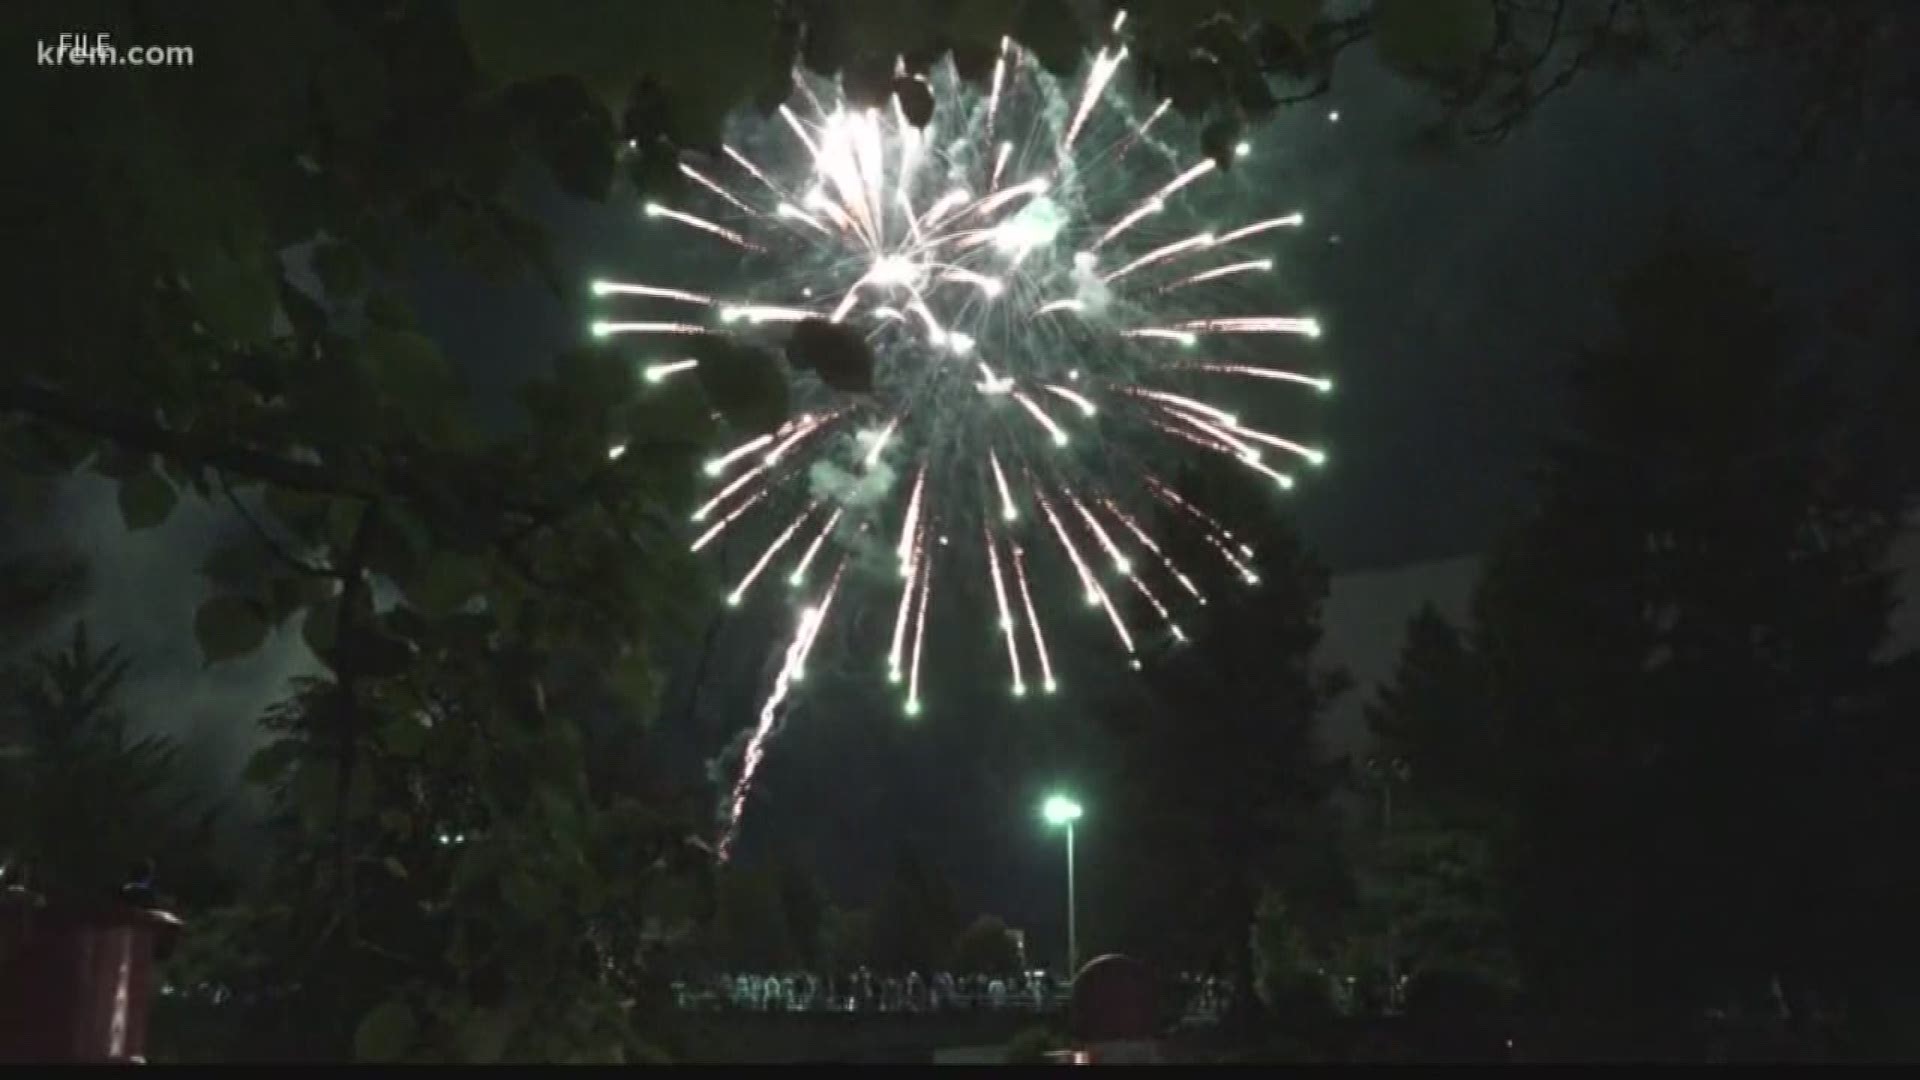 KREM's Taylor Viydo met with Matt King, who is one of the people lighting fireworks in Riverfront Park, and he and others train with federal and local agencies to put on the shows.